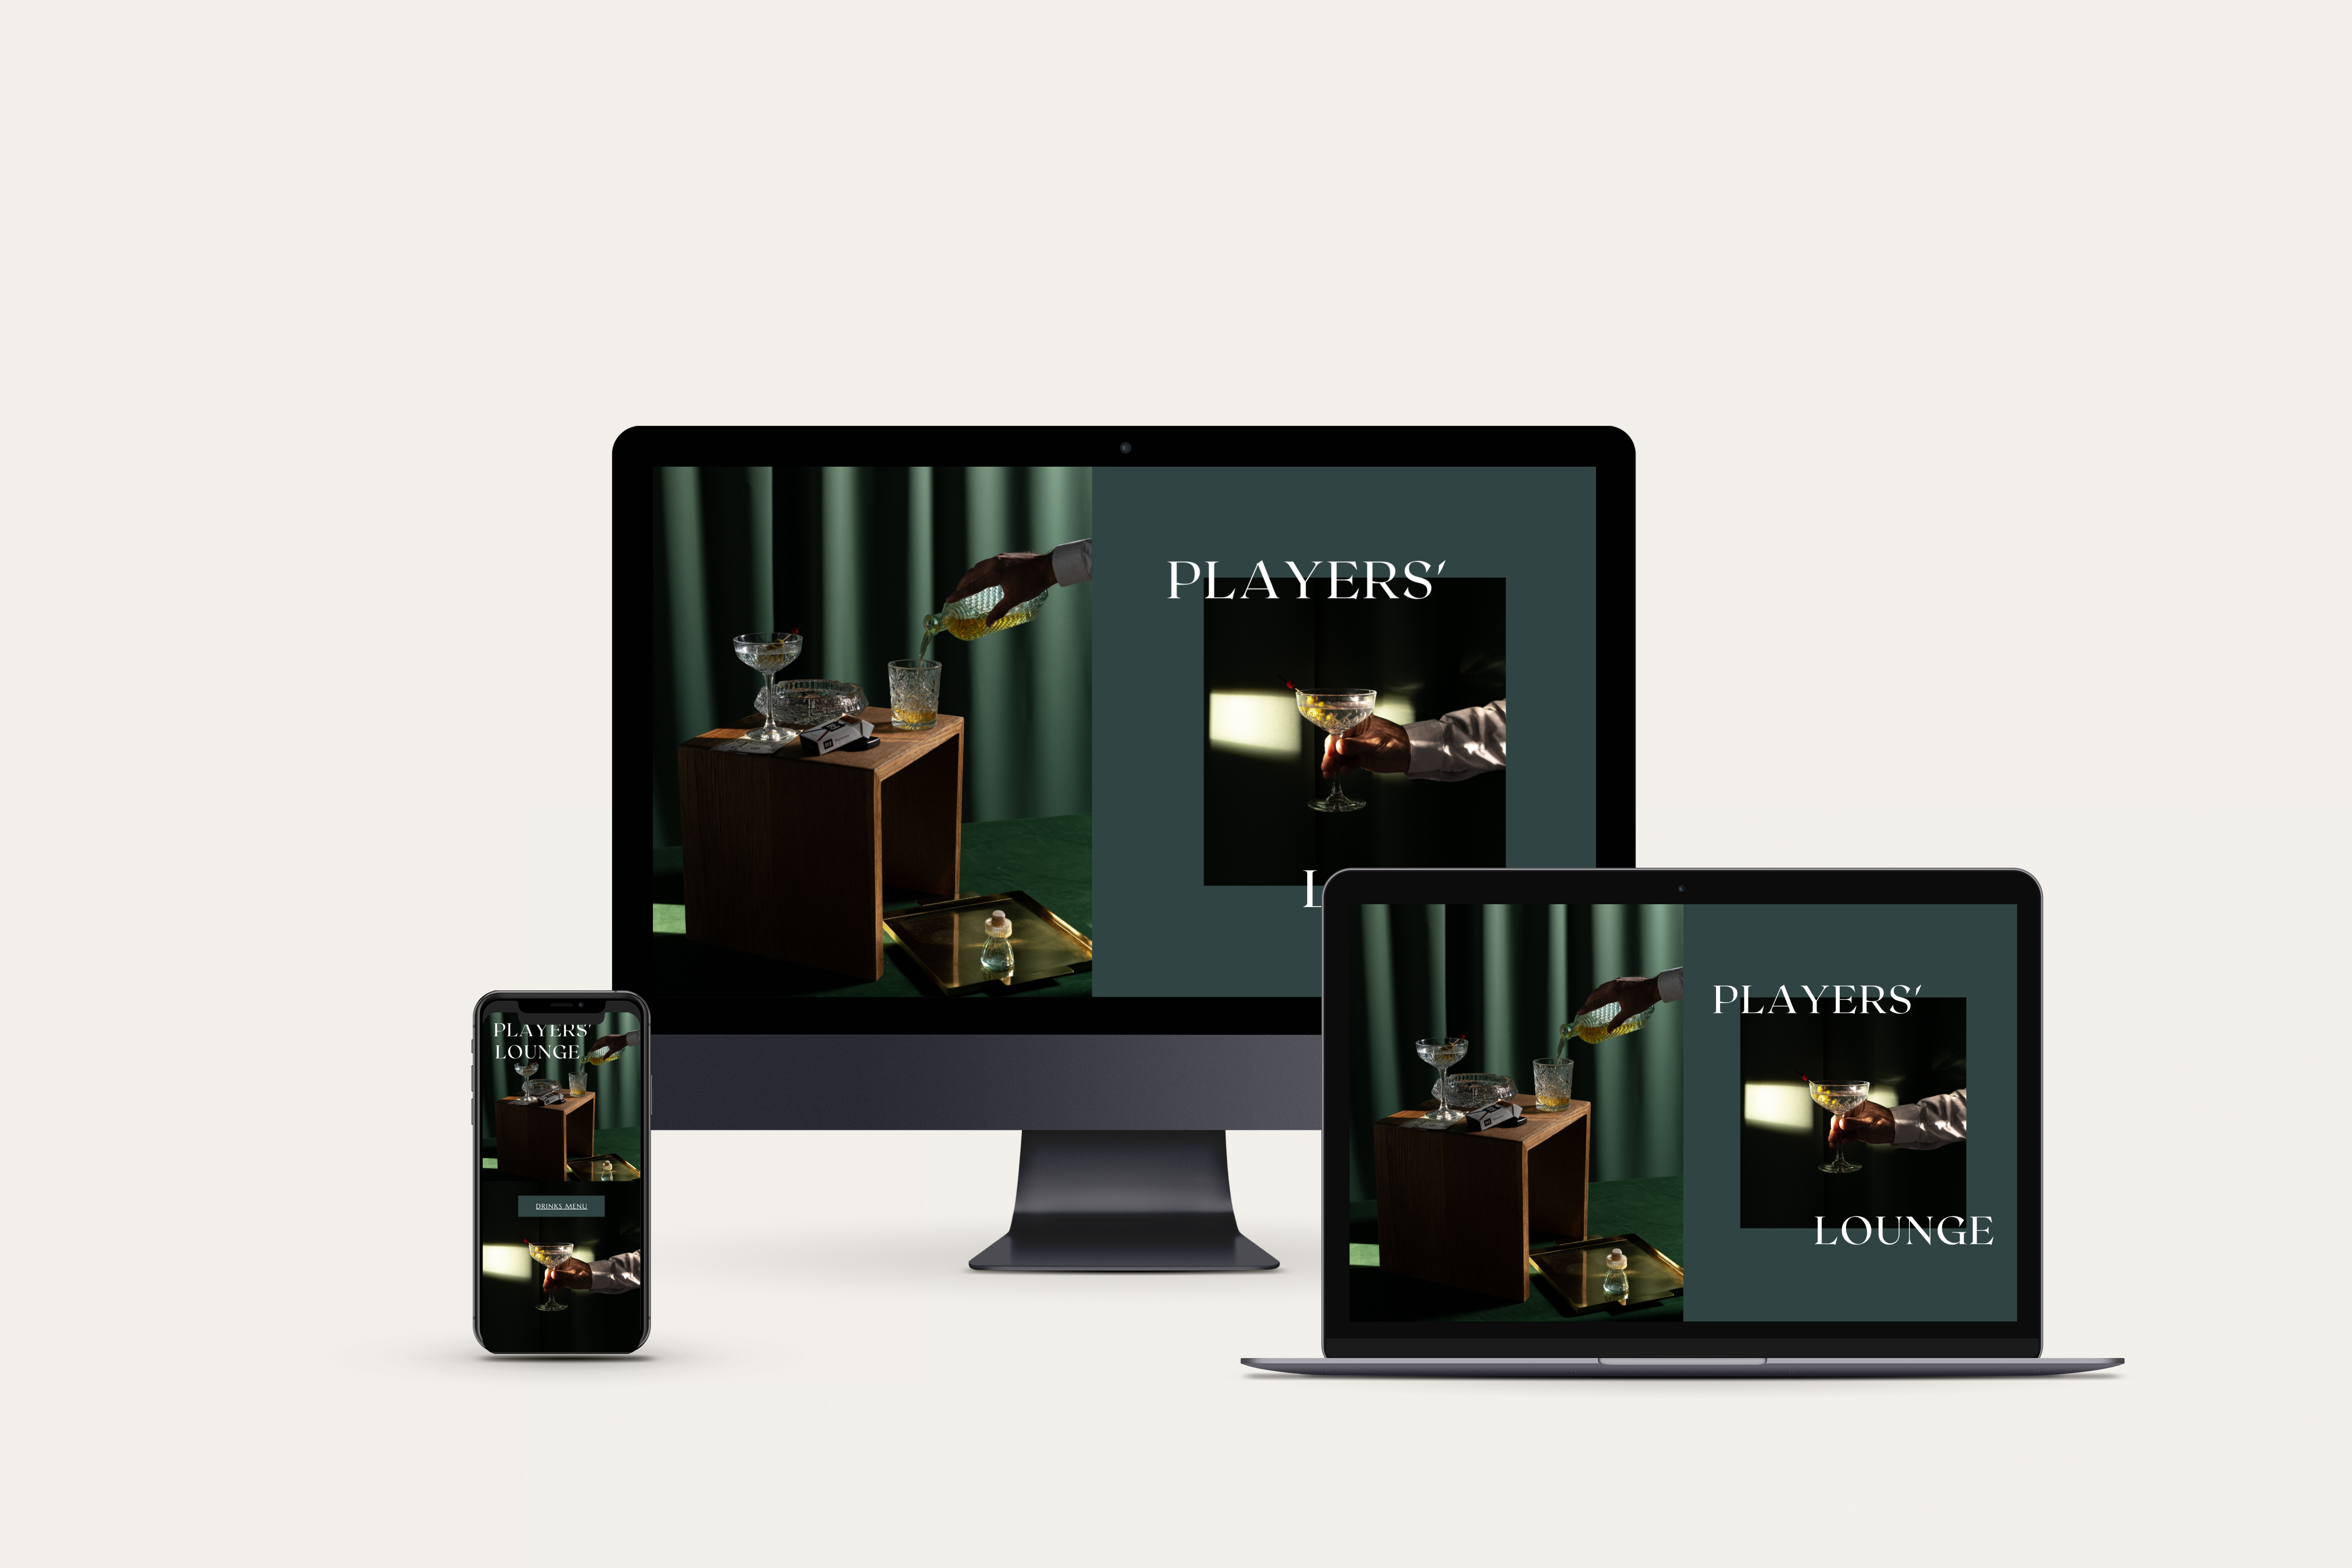 Website design and e-commerce website design in Salcombe, South Devon Torquay, Exeter, Plymouth. London. Creative agency.